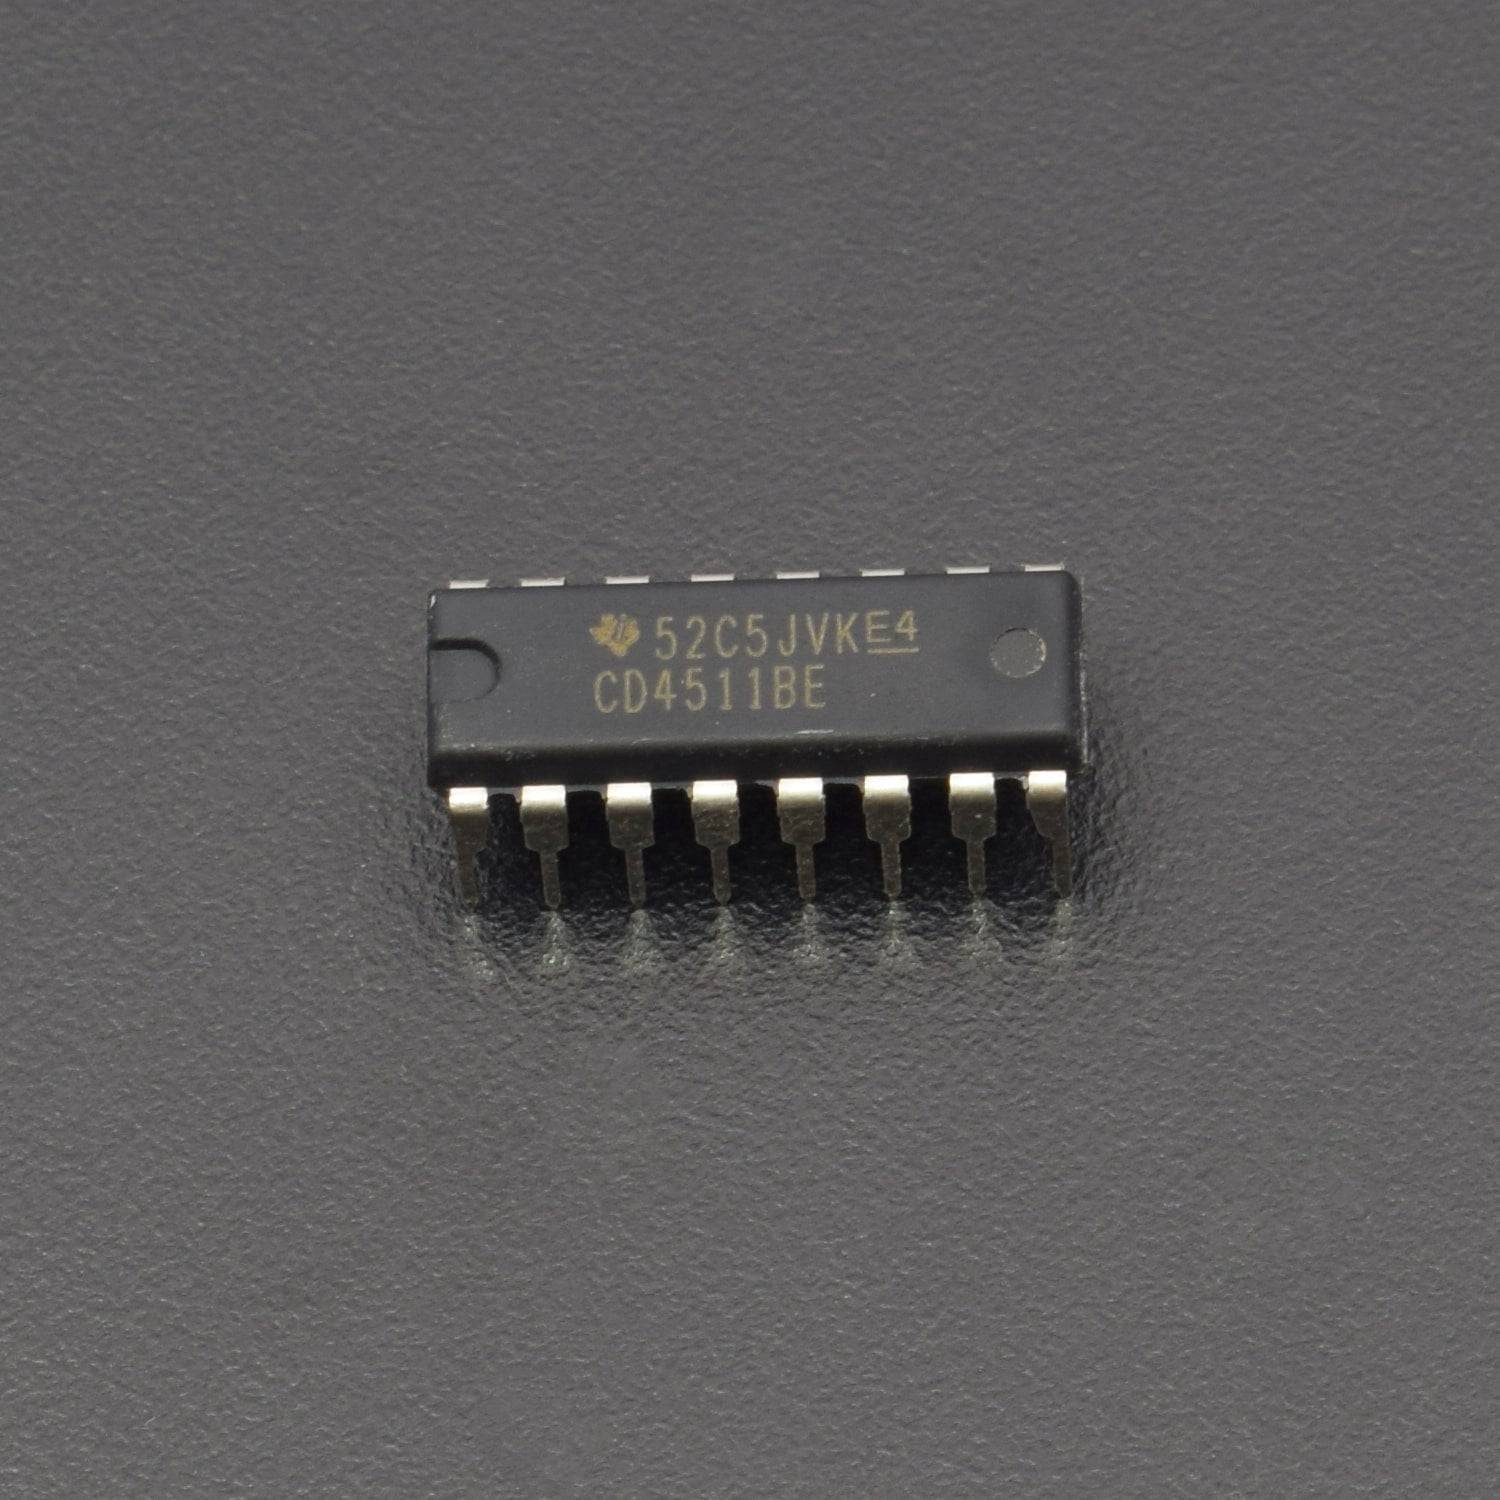 CD4511 BE 4511 CMOS BCD to 7 segment Latch Decoder IC - AC084 - REES52